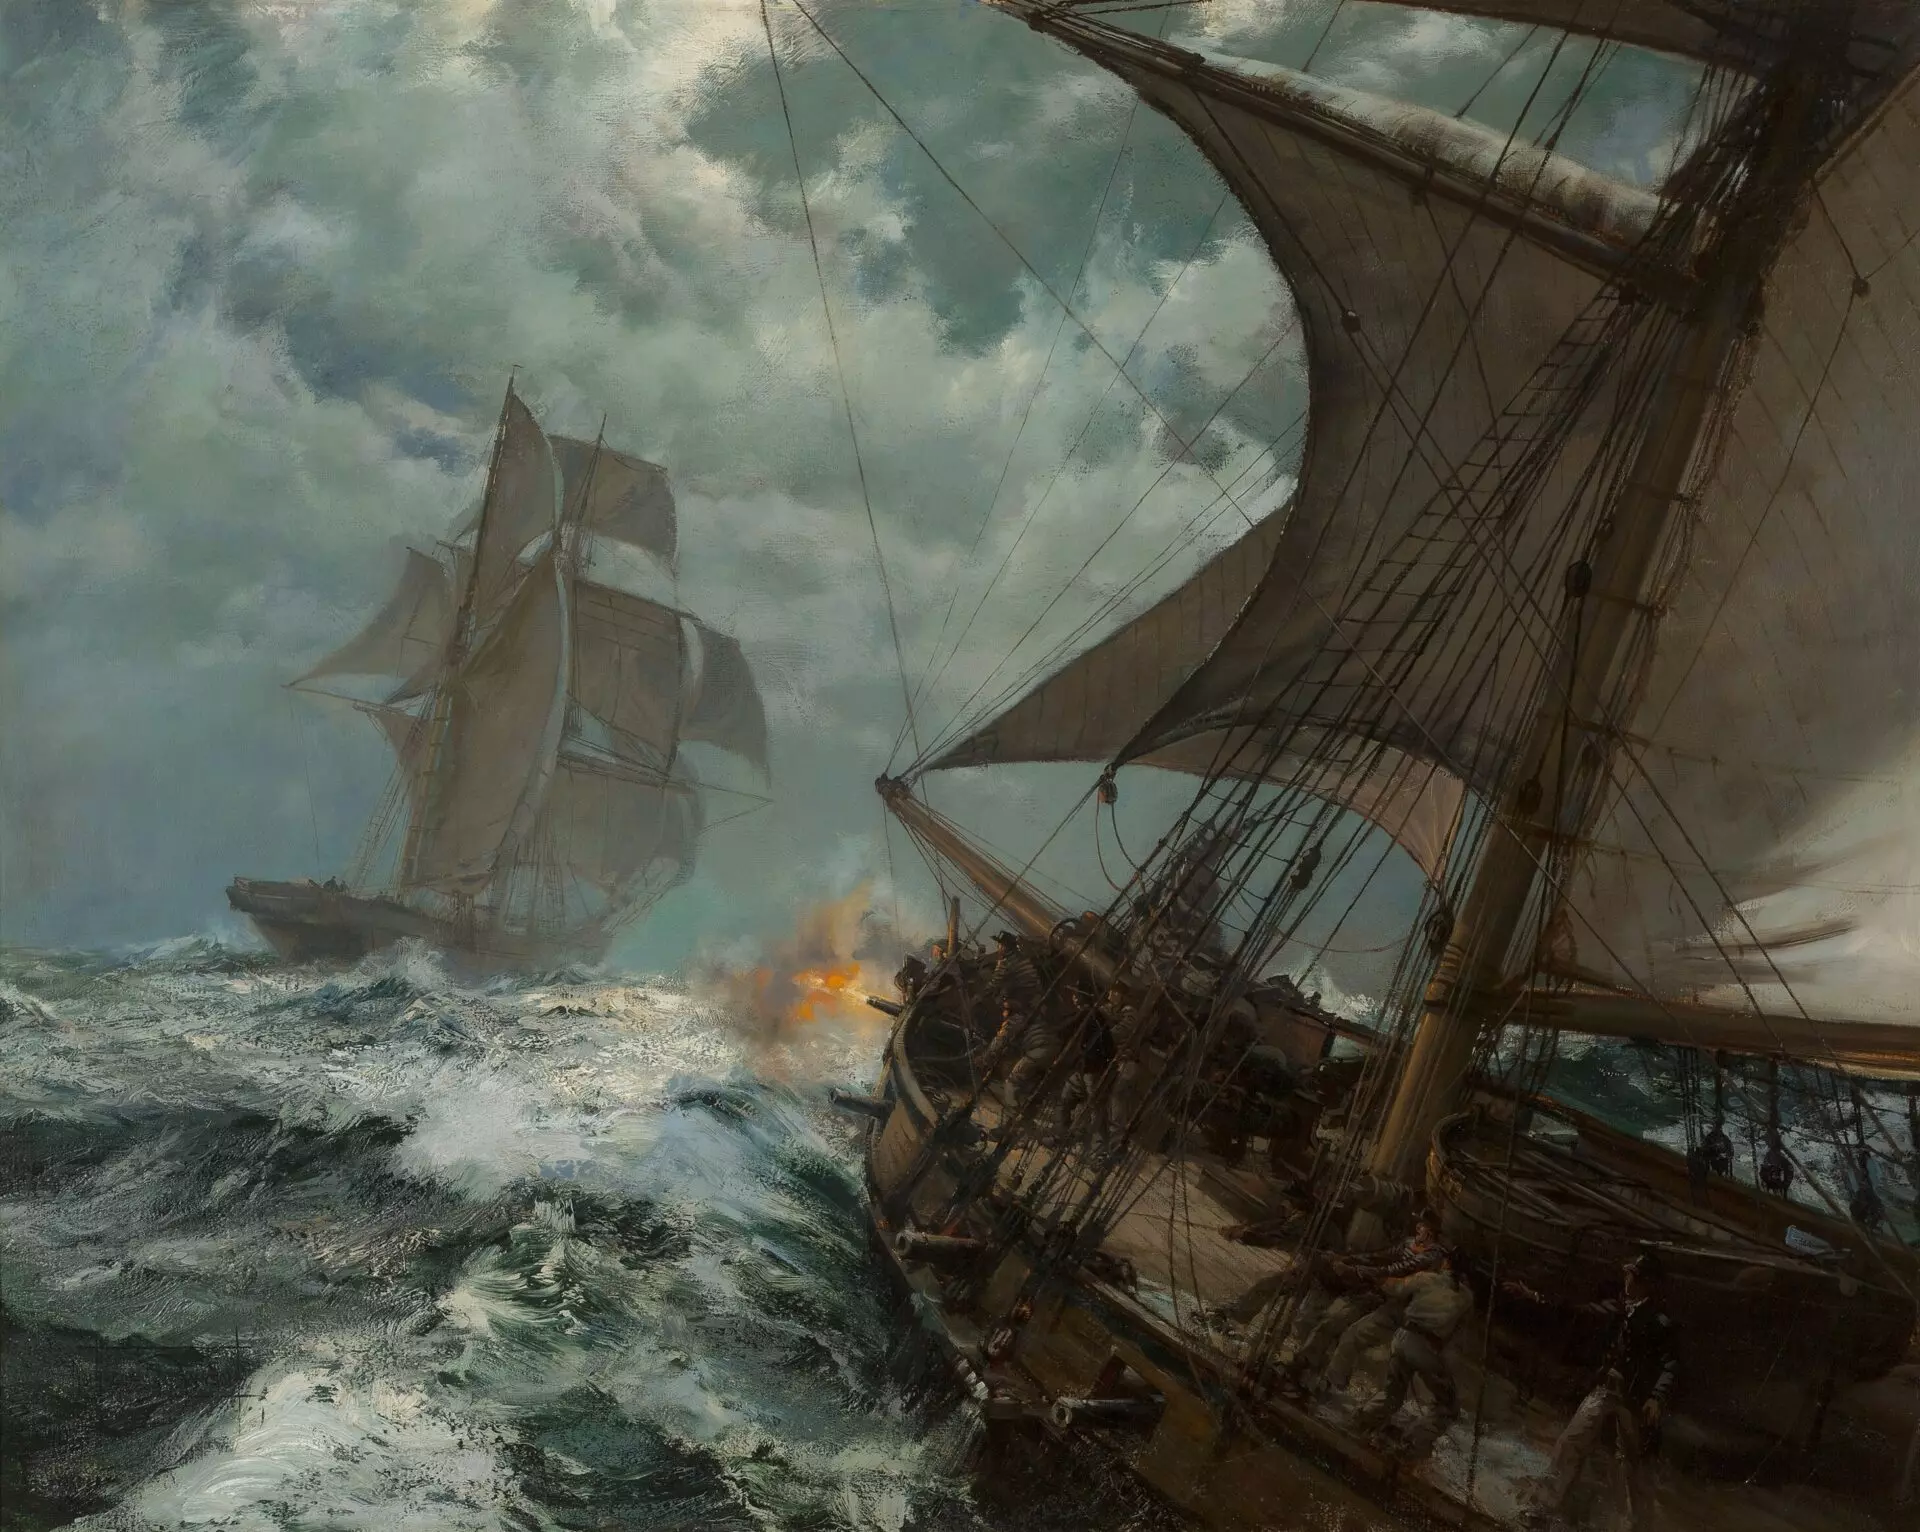 A painting of a tall ship firing a cannon at another ship.